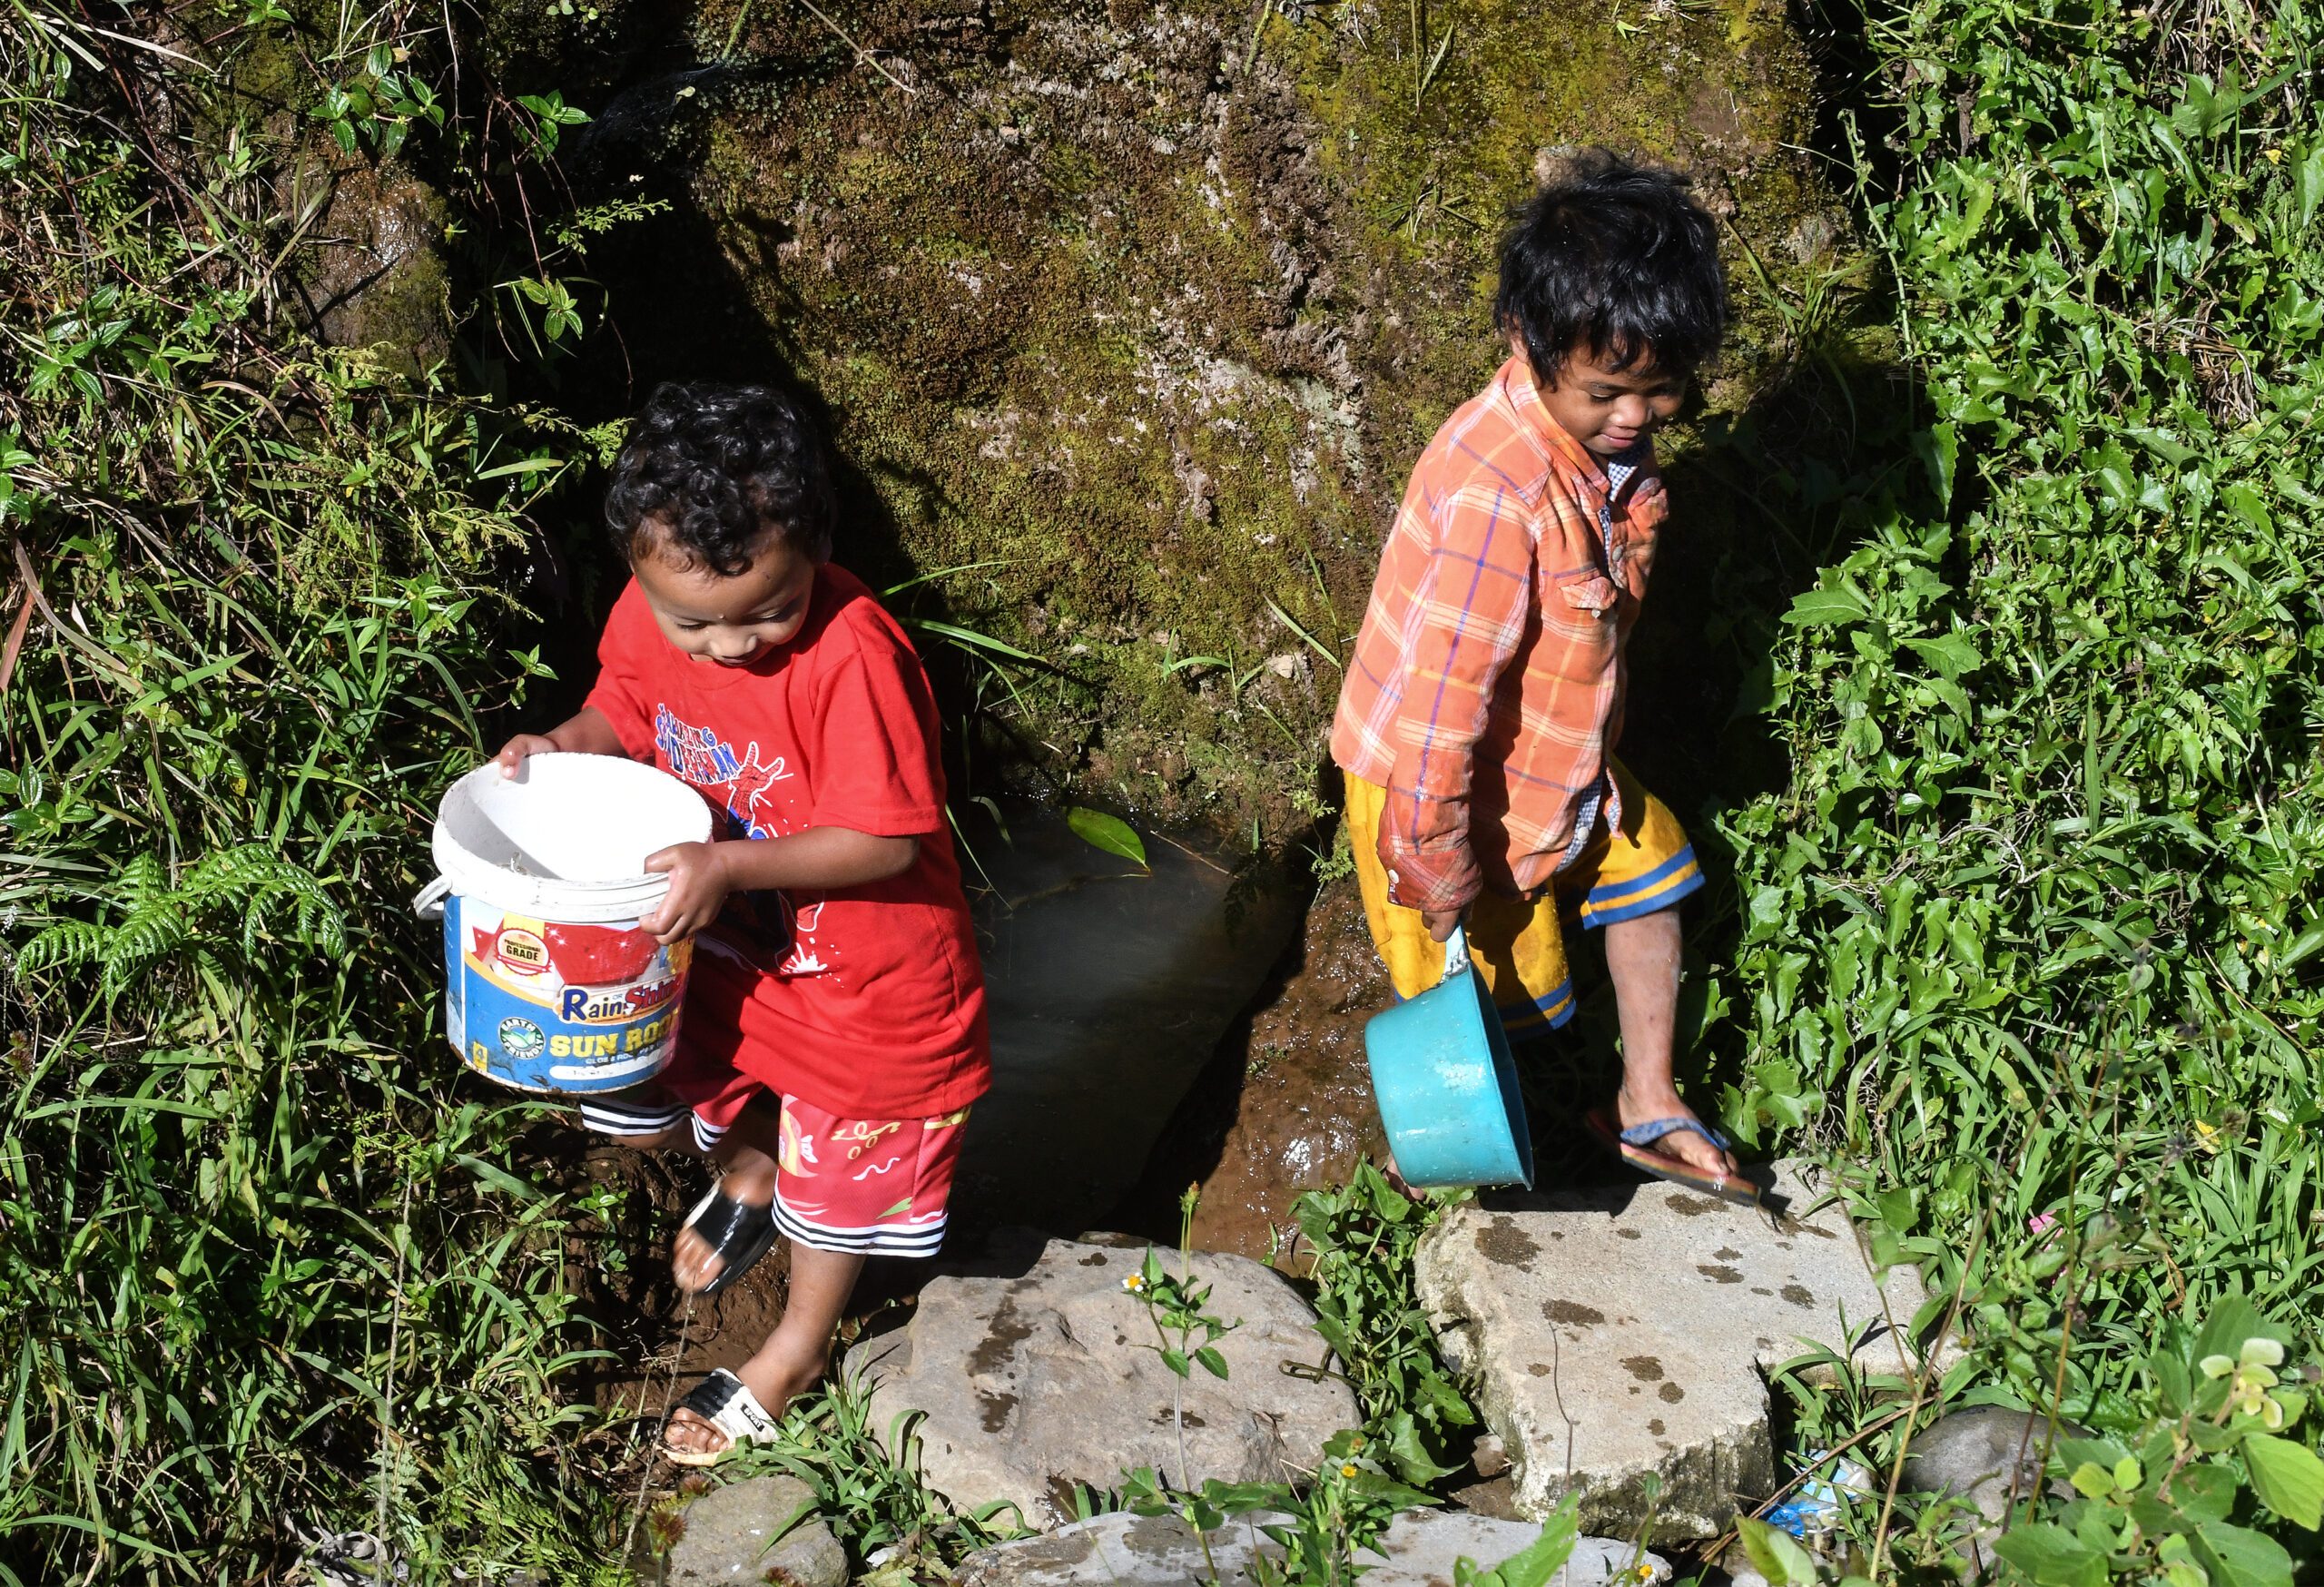 For years, Bukidnon village relies on unsafe water sources for survival